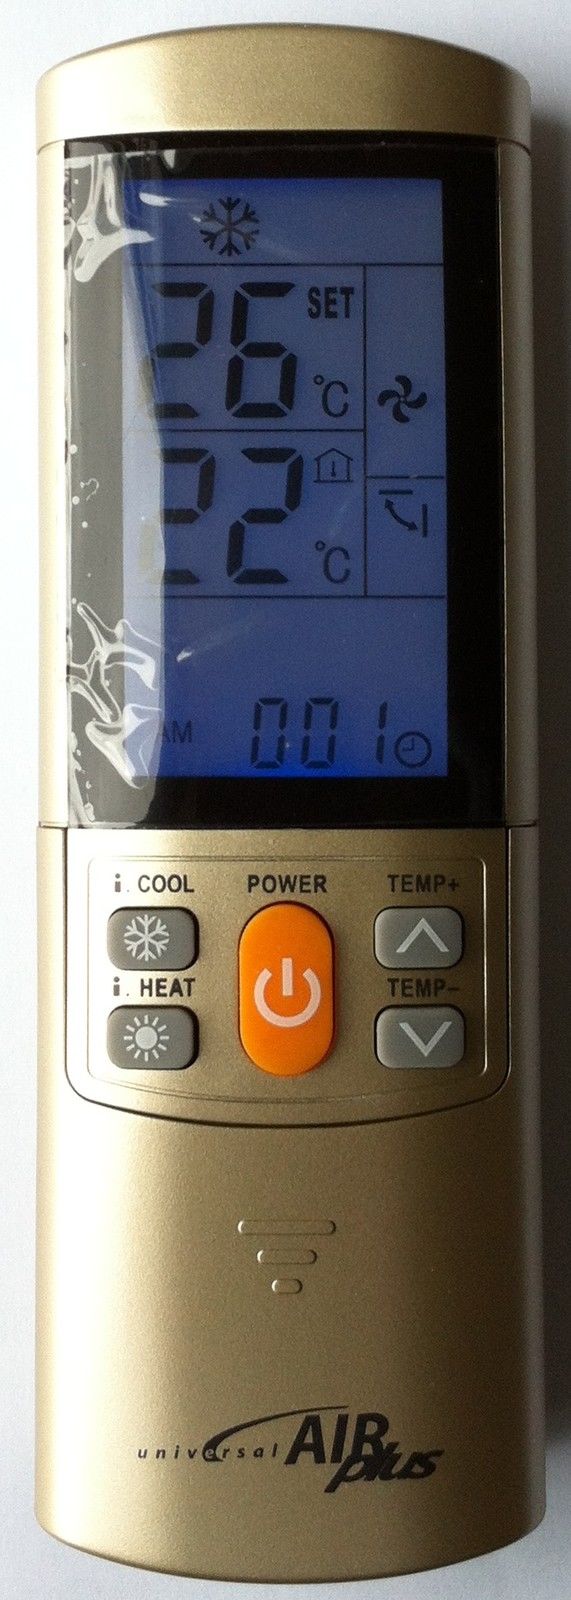 TOSHIBA REPLACEMENT UNIVERSAL AIR CONDITIONER REMOTE CONTROL - TOSHIBA AIR CON FULL FUNCTION